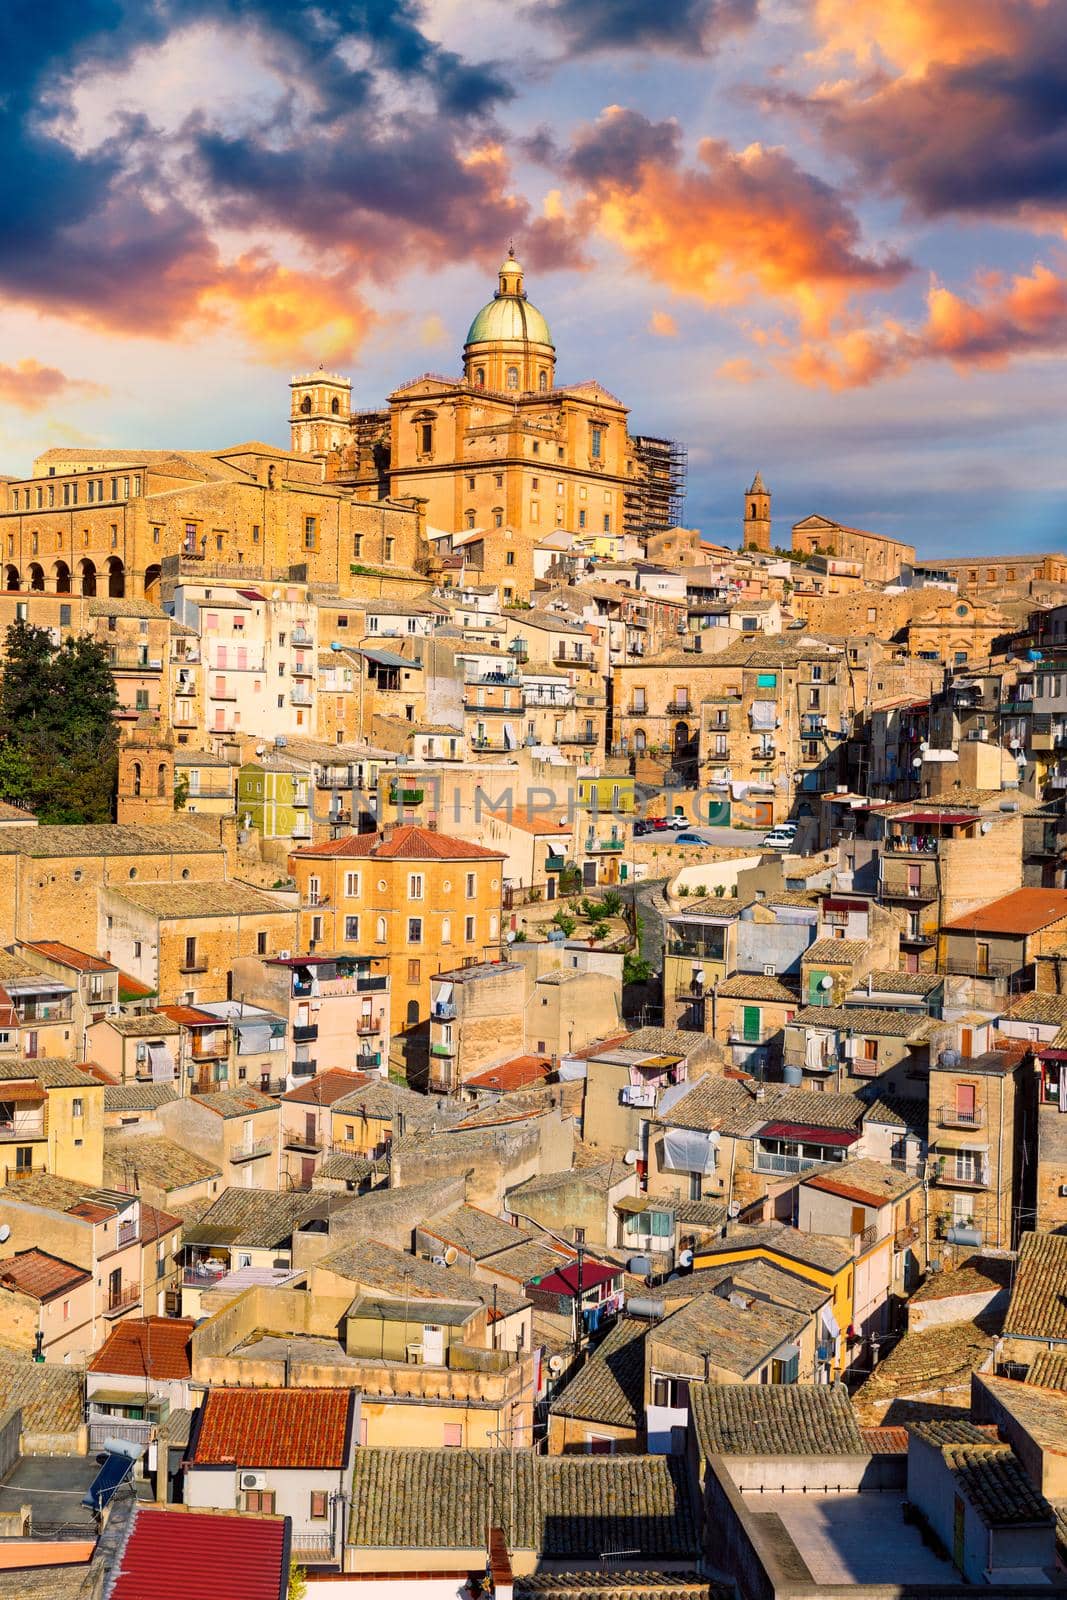 Piazza Armerina in the Enna province of Sicily in Italy. Piazza Armerina cityscape with the Cathedral SS. Assunta and old town, Sicily, Piazza Armerina, Province of Enna, Sicily, Italy, Europe.